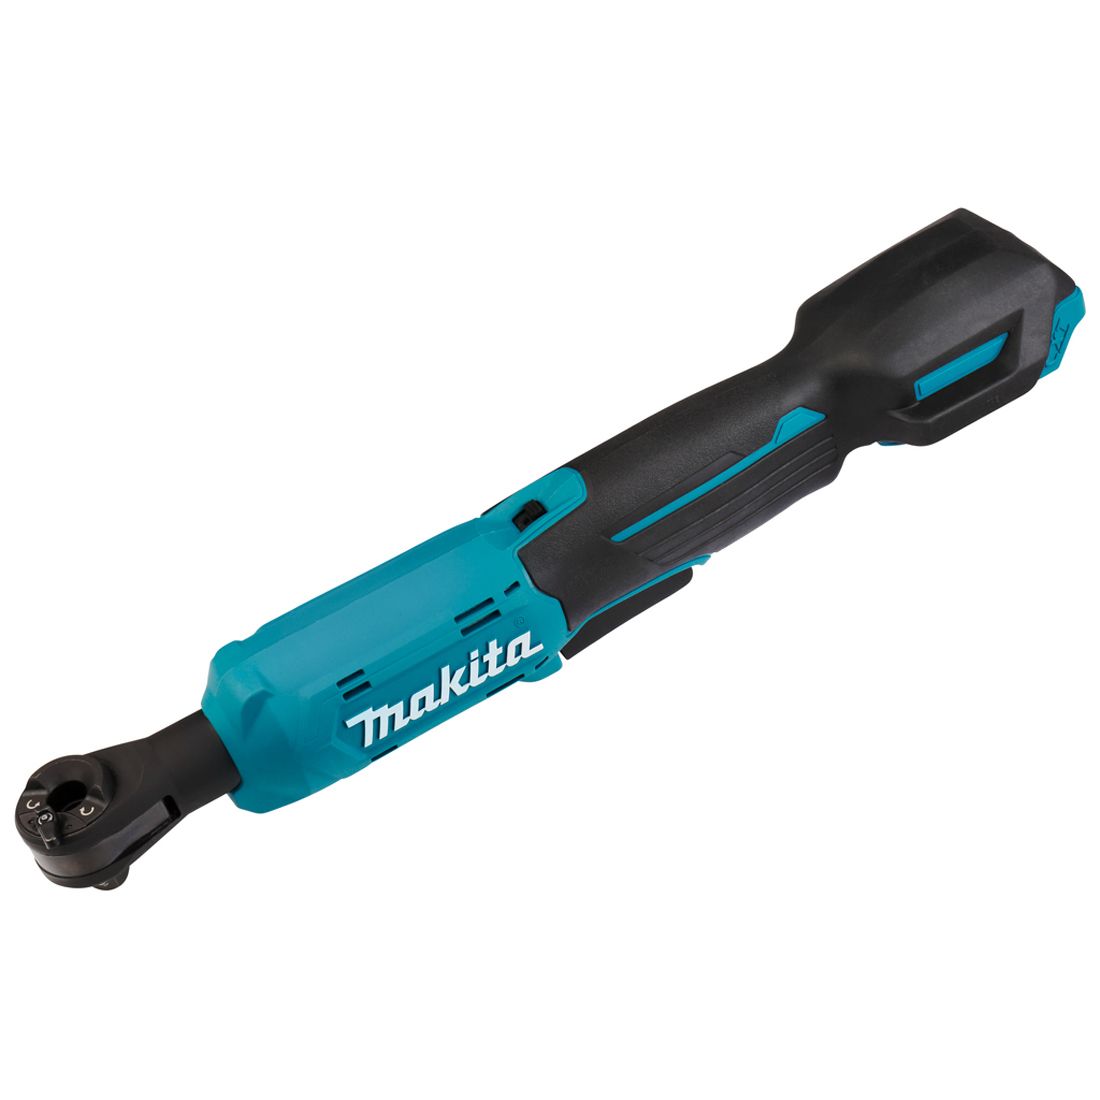 MAKITA WR100DZ 12V MAX CXT CORDLESS RATCHET WRENCH BODY ONLY